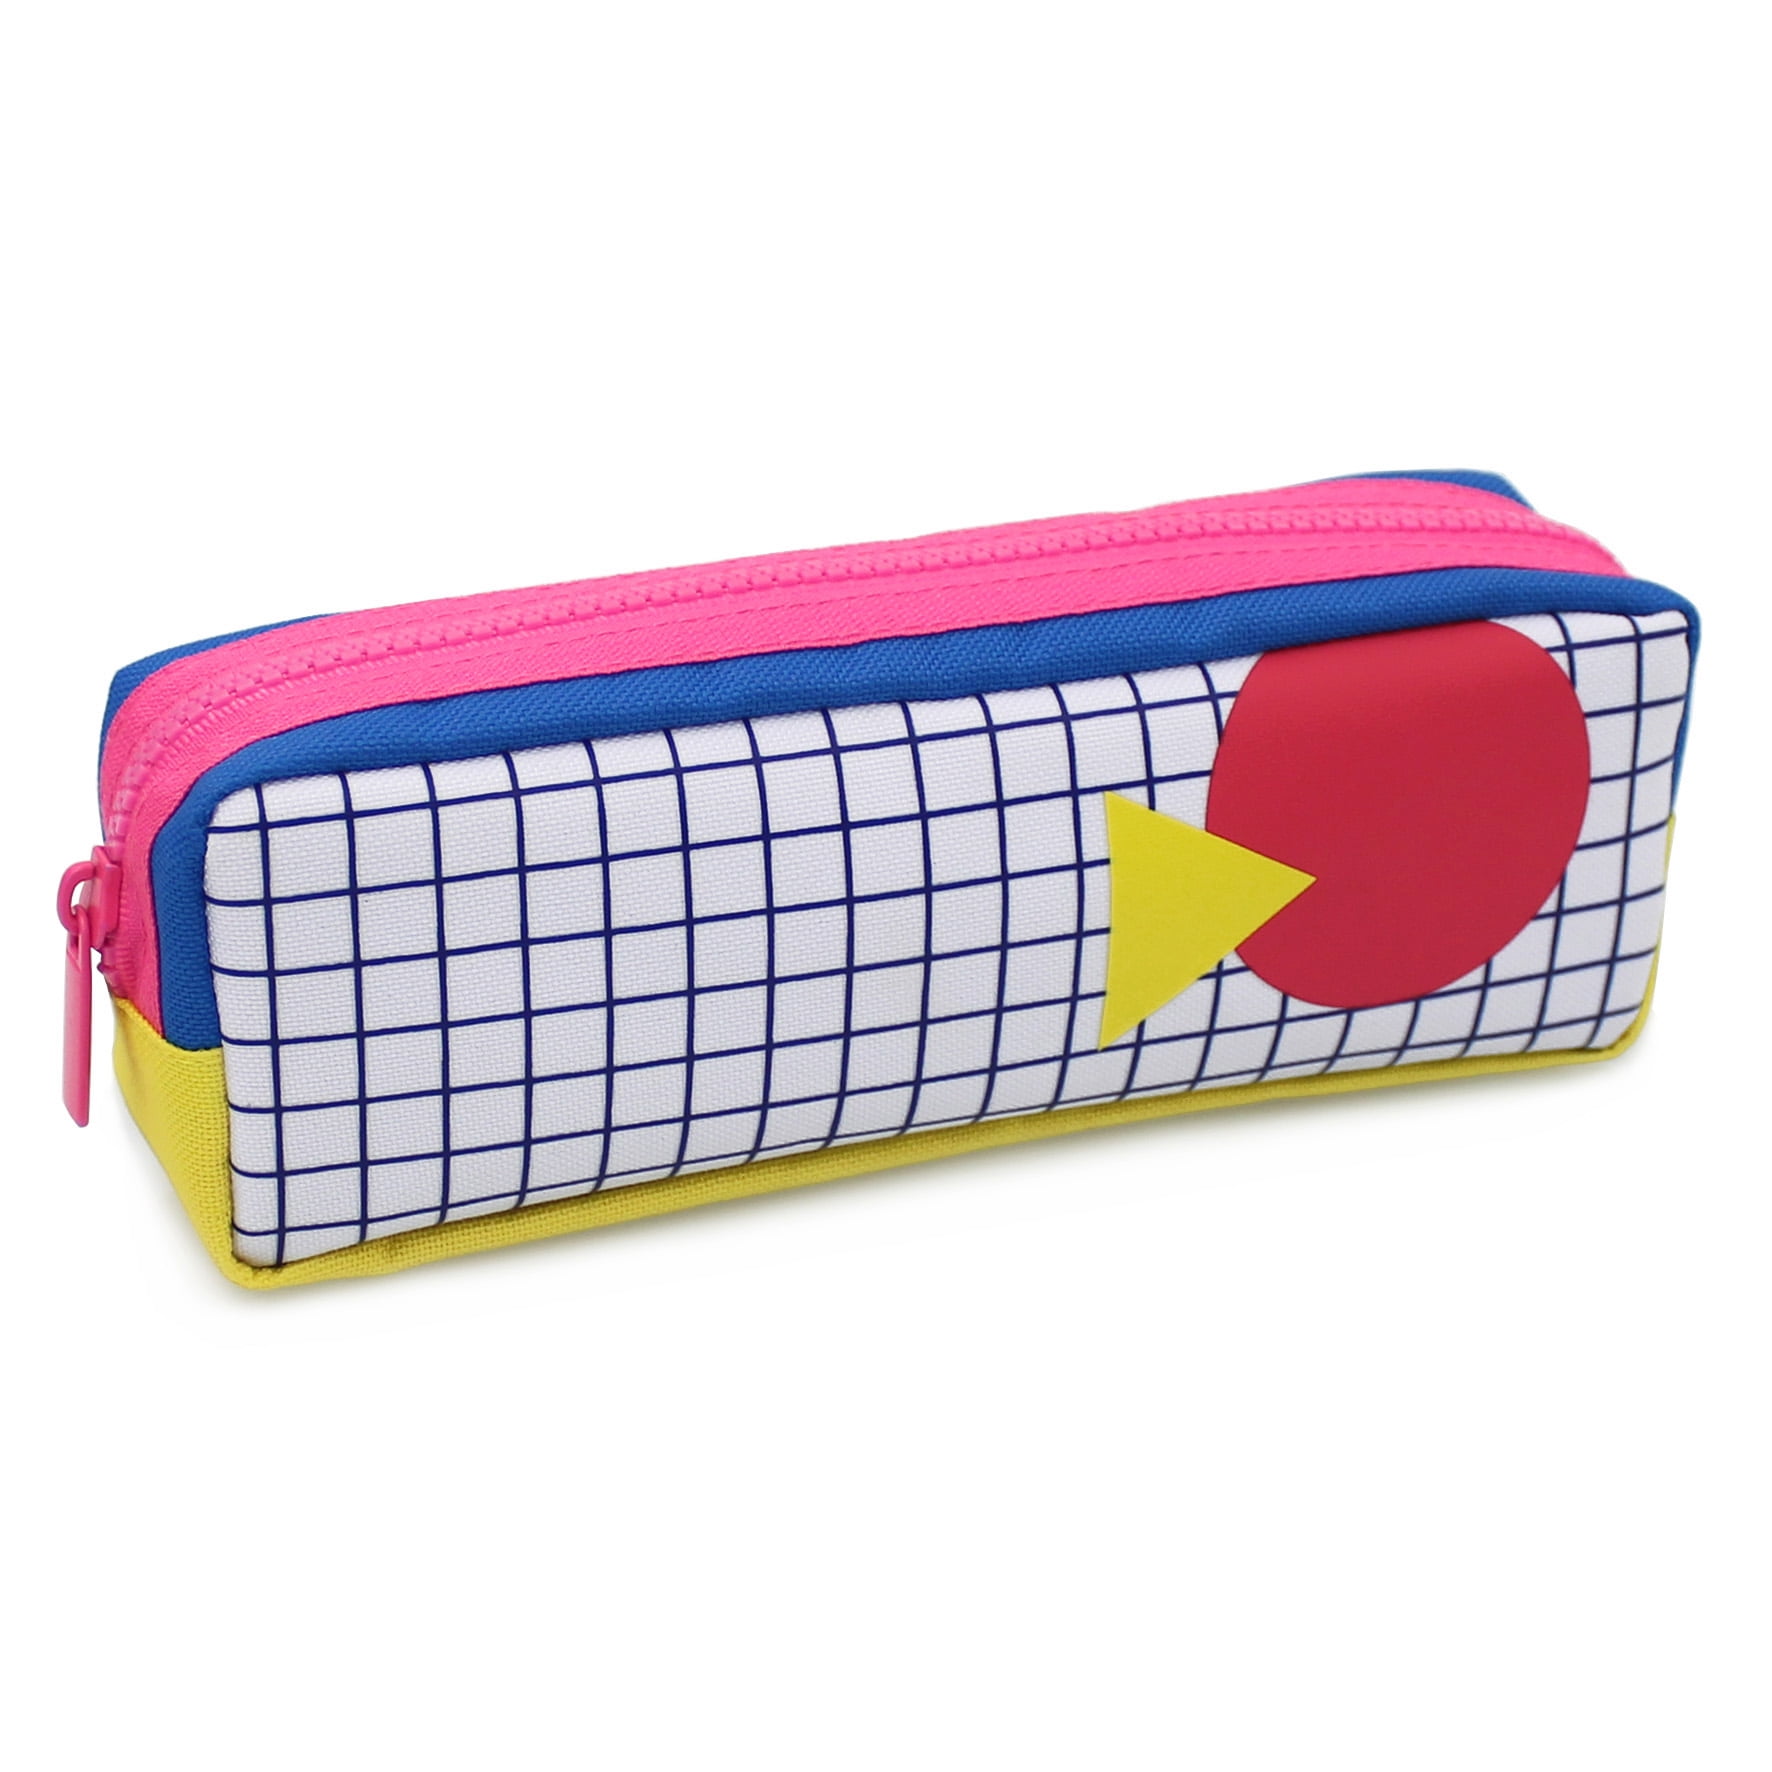 Pen + Gear Blue/Red Pencil Holder Pouch Zip-up Durable Polyester w